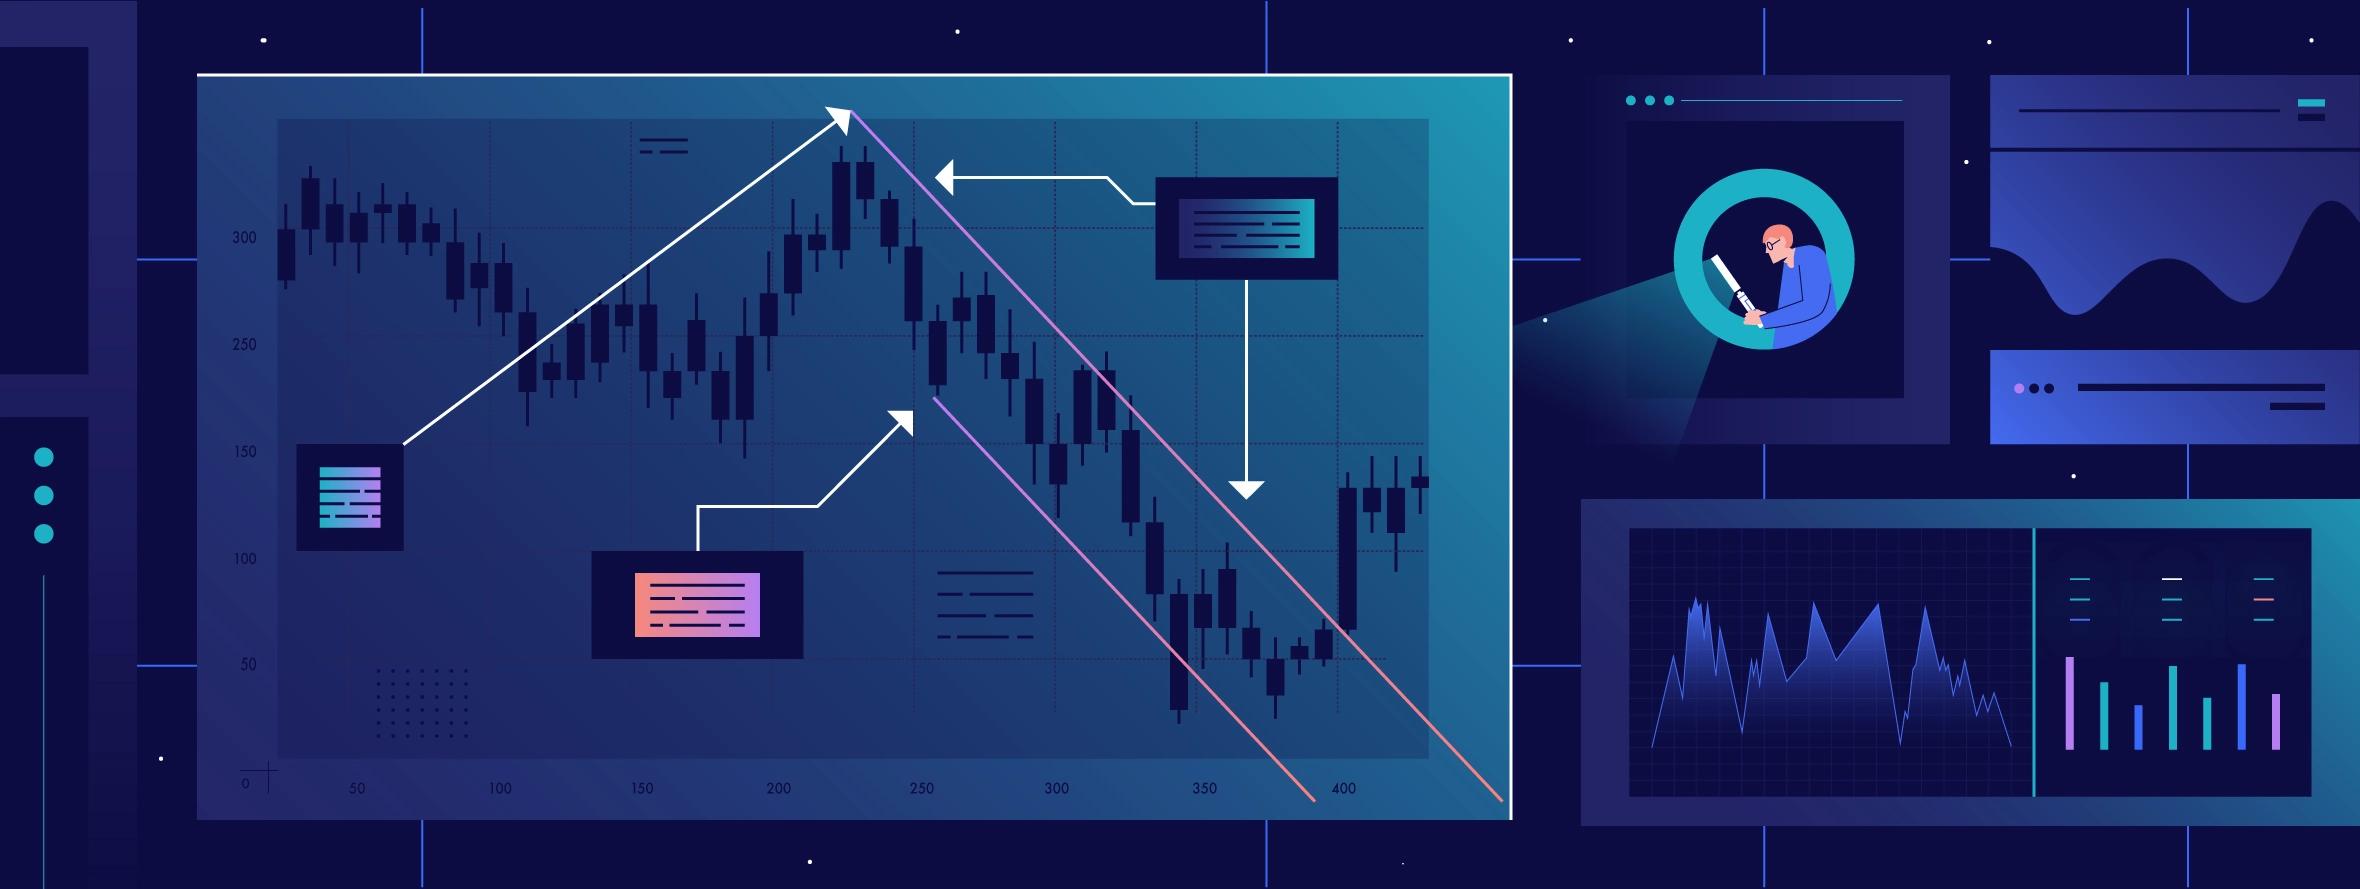 Technical Analysis 101: The 3 Signals to Help Spot a Bottom